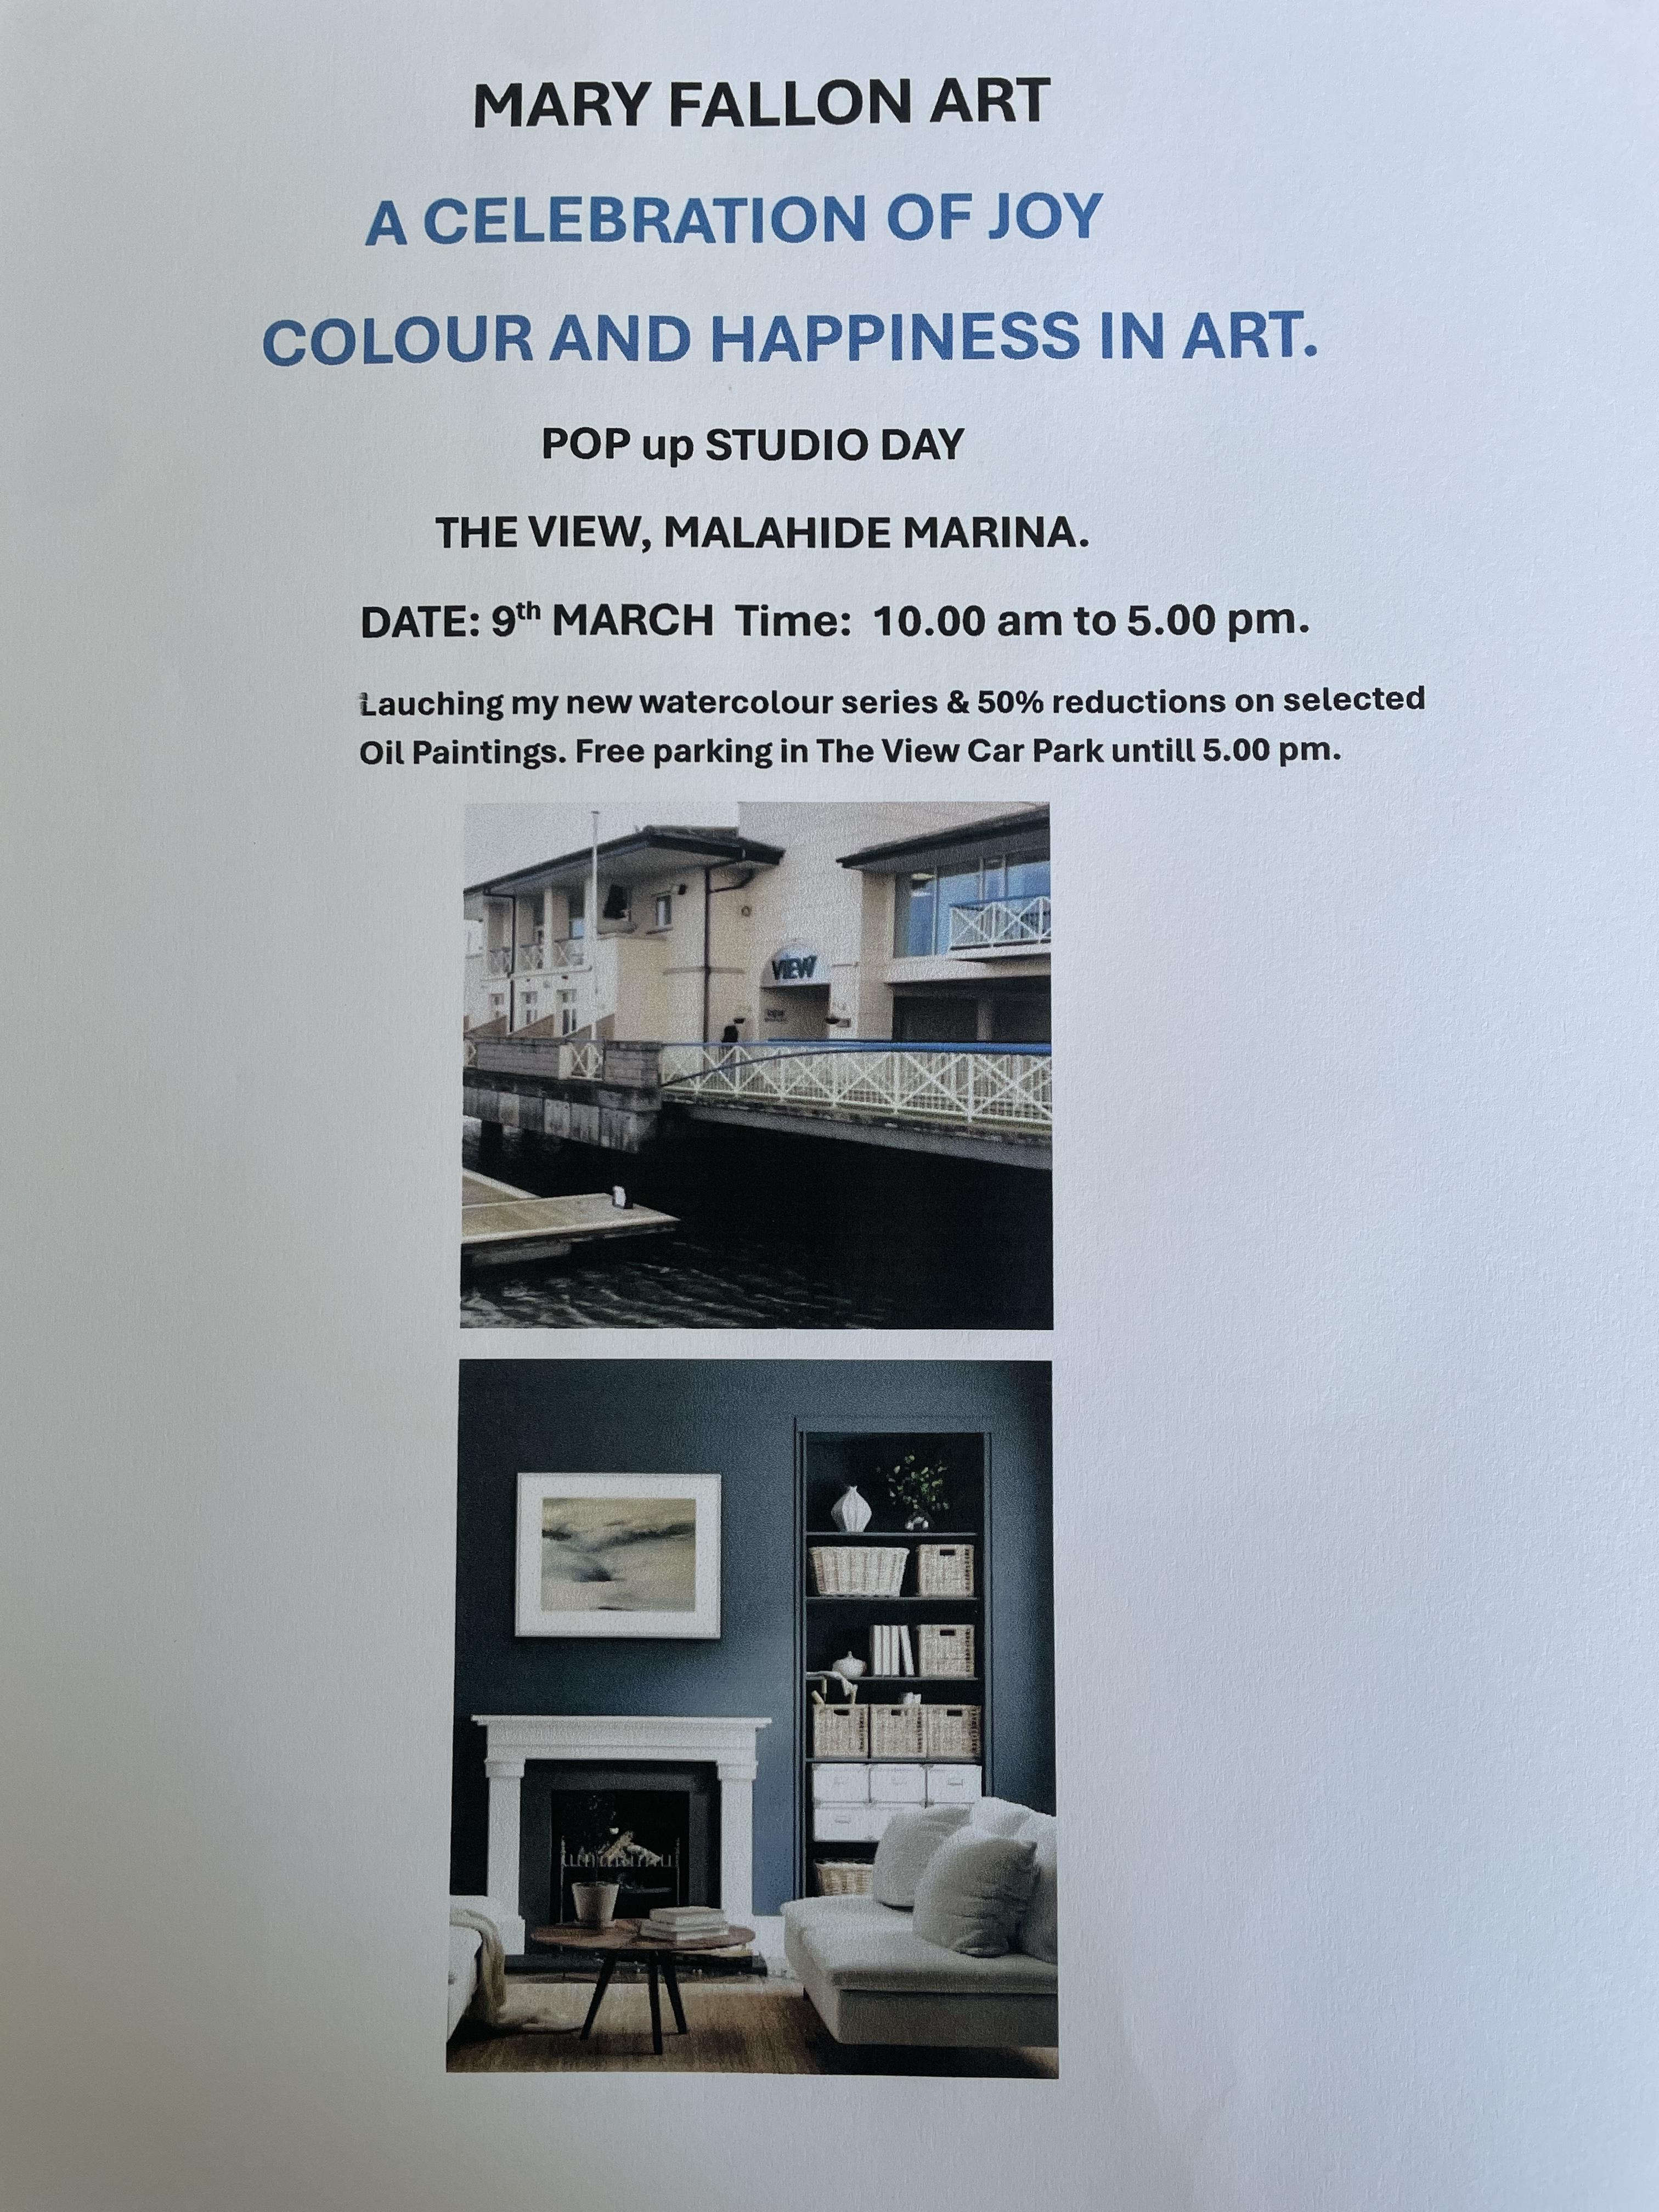 Pop up Studio day in The View , Malahide Marina. Date 7th March, 10.00 am - 4.30 pm.